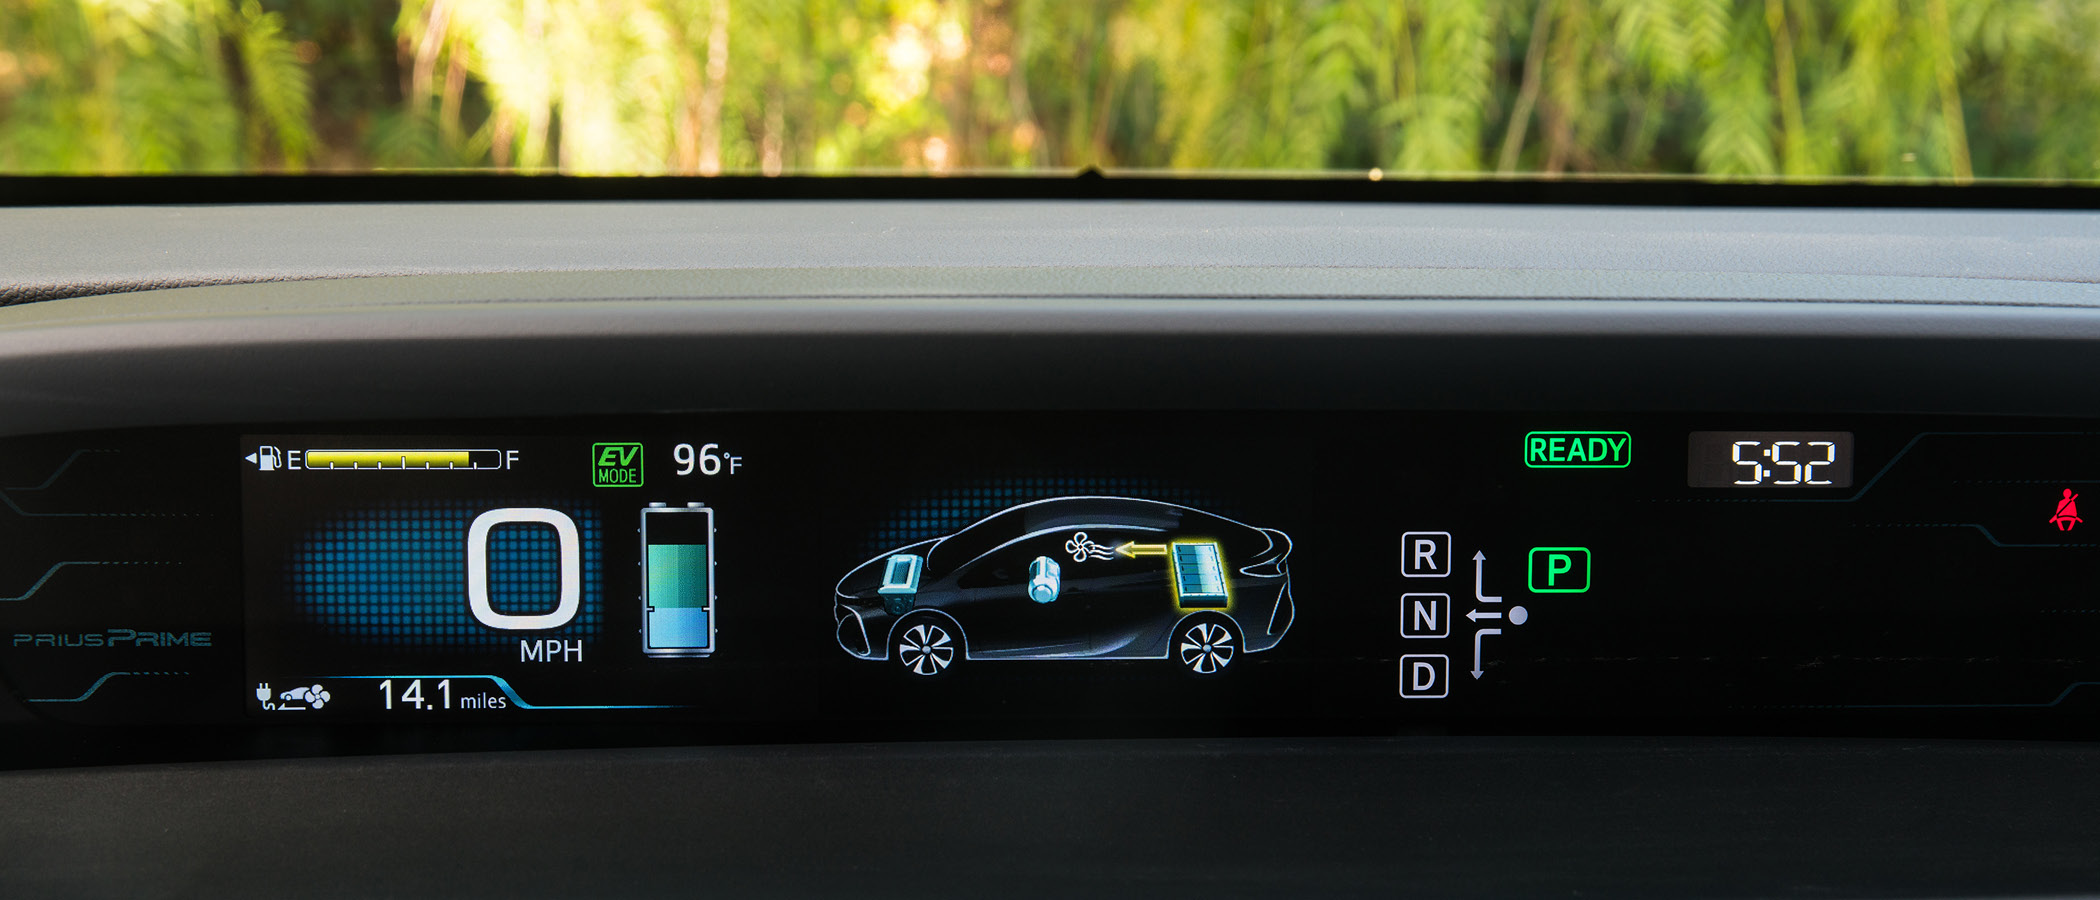 Dashboard display of a hybrid car showing real-time battery recharge diagram